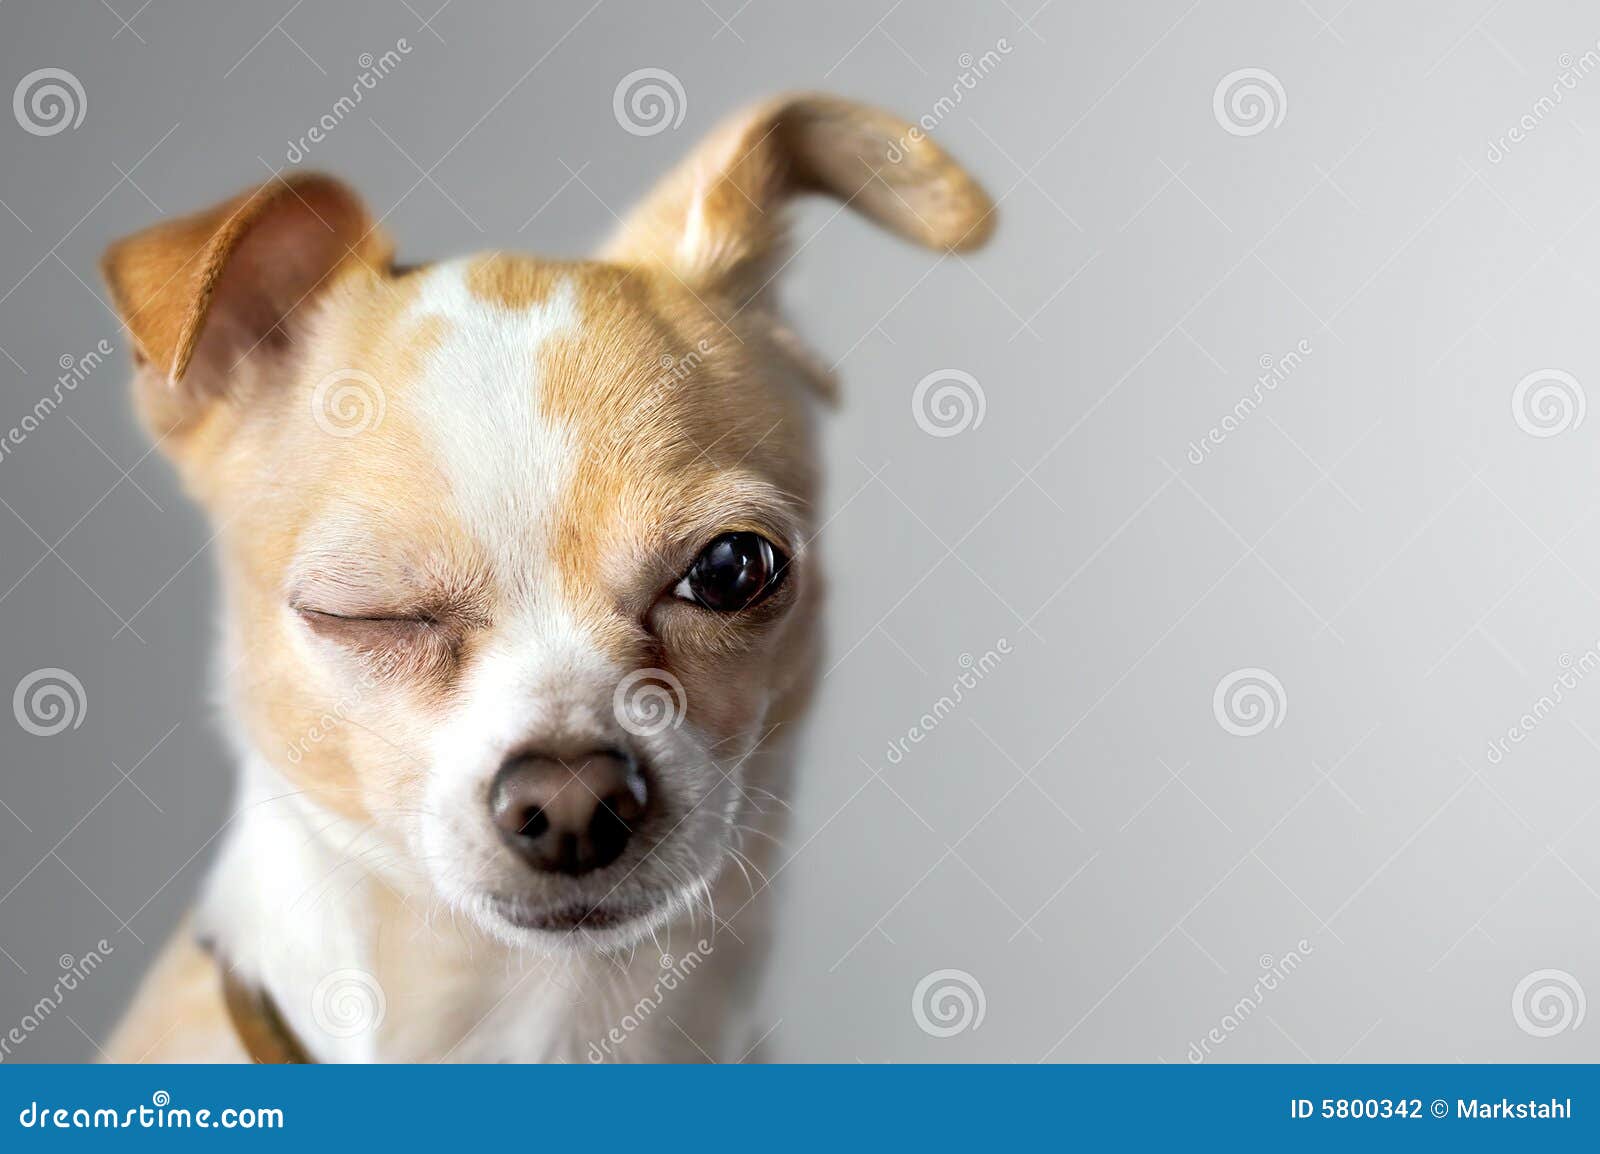 winking chihuahua appears to say hello